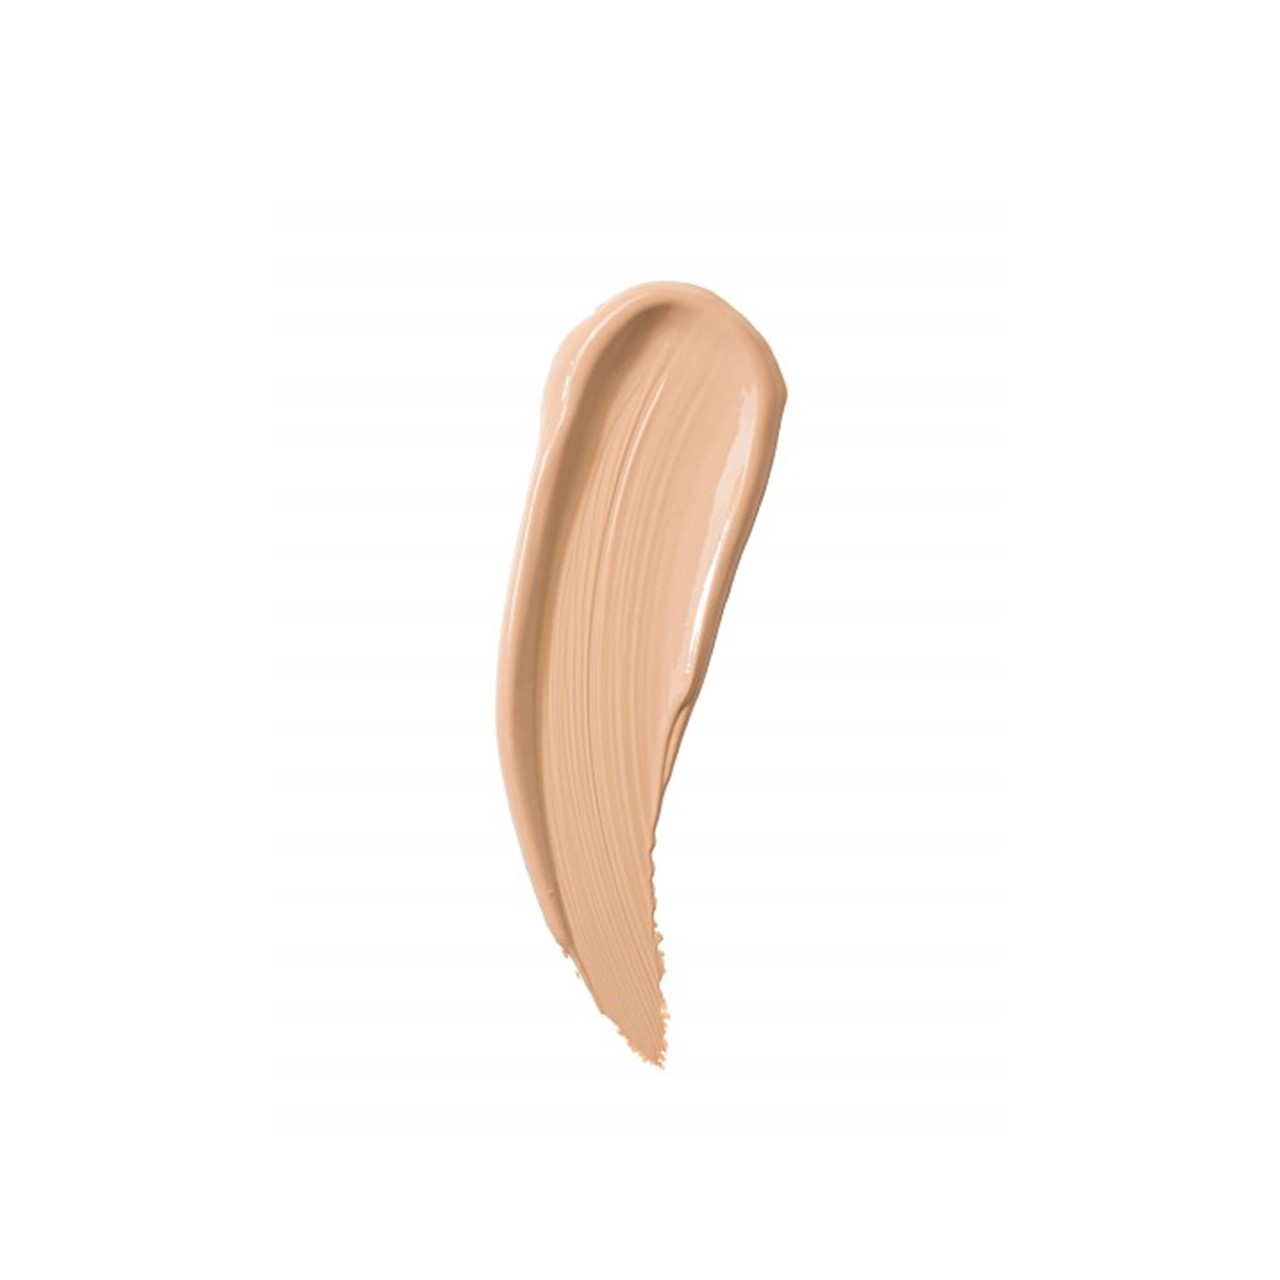 Perfect Coverage Foundation 104 Vanille Eclat